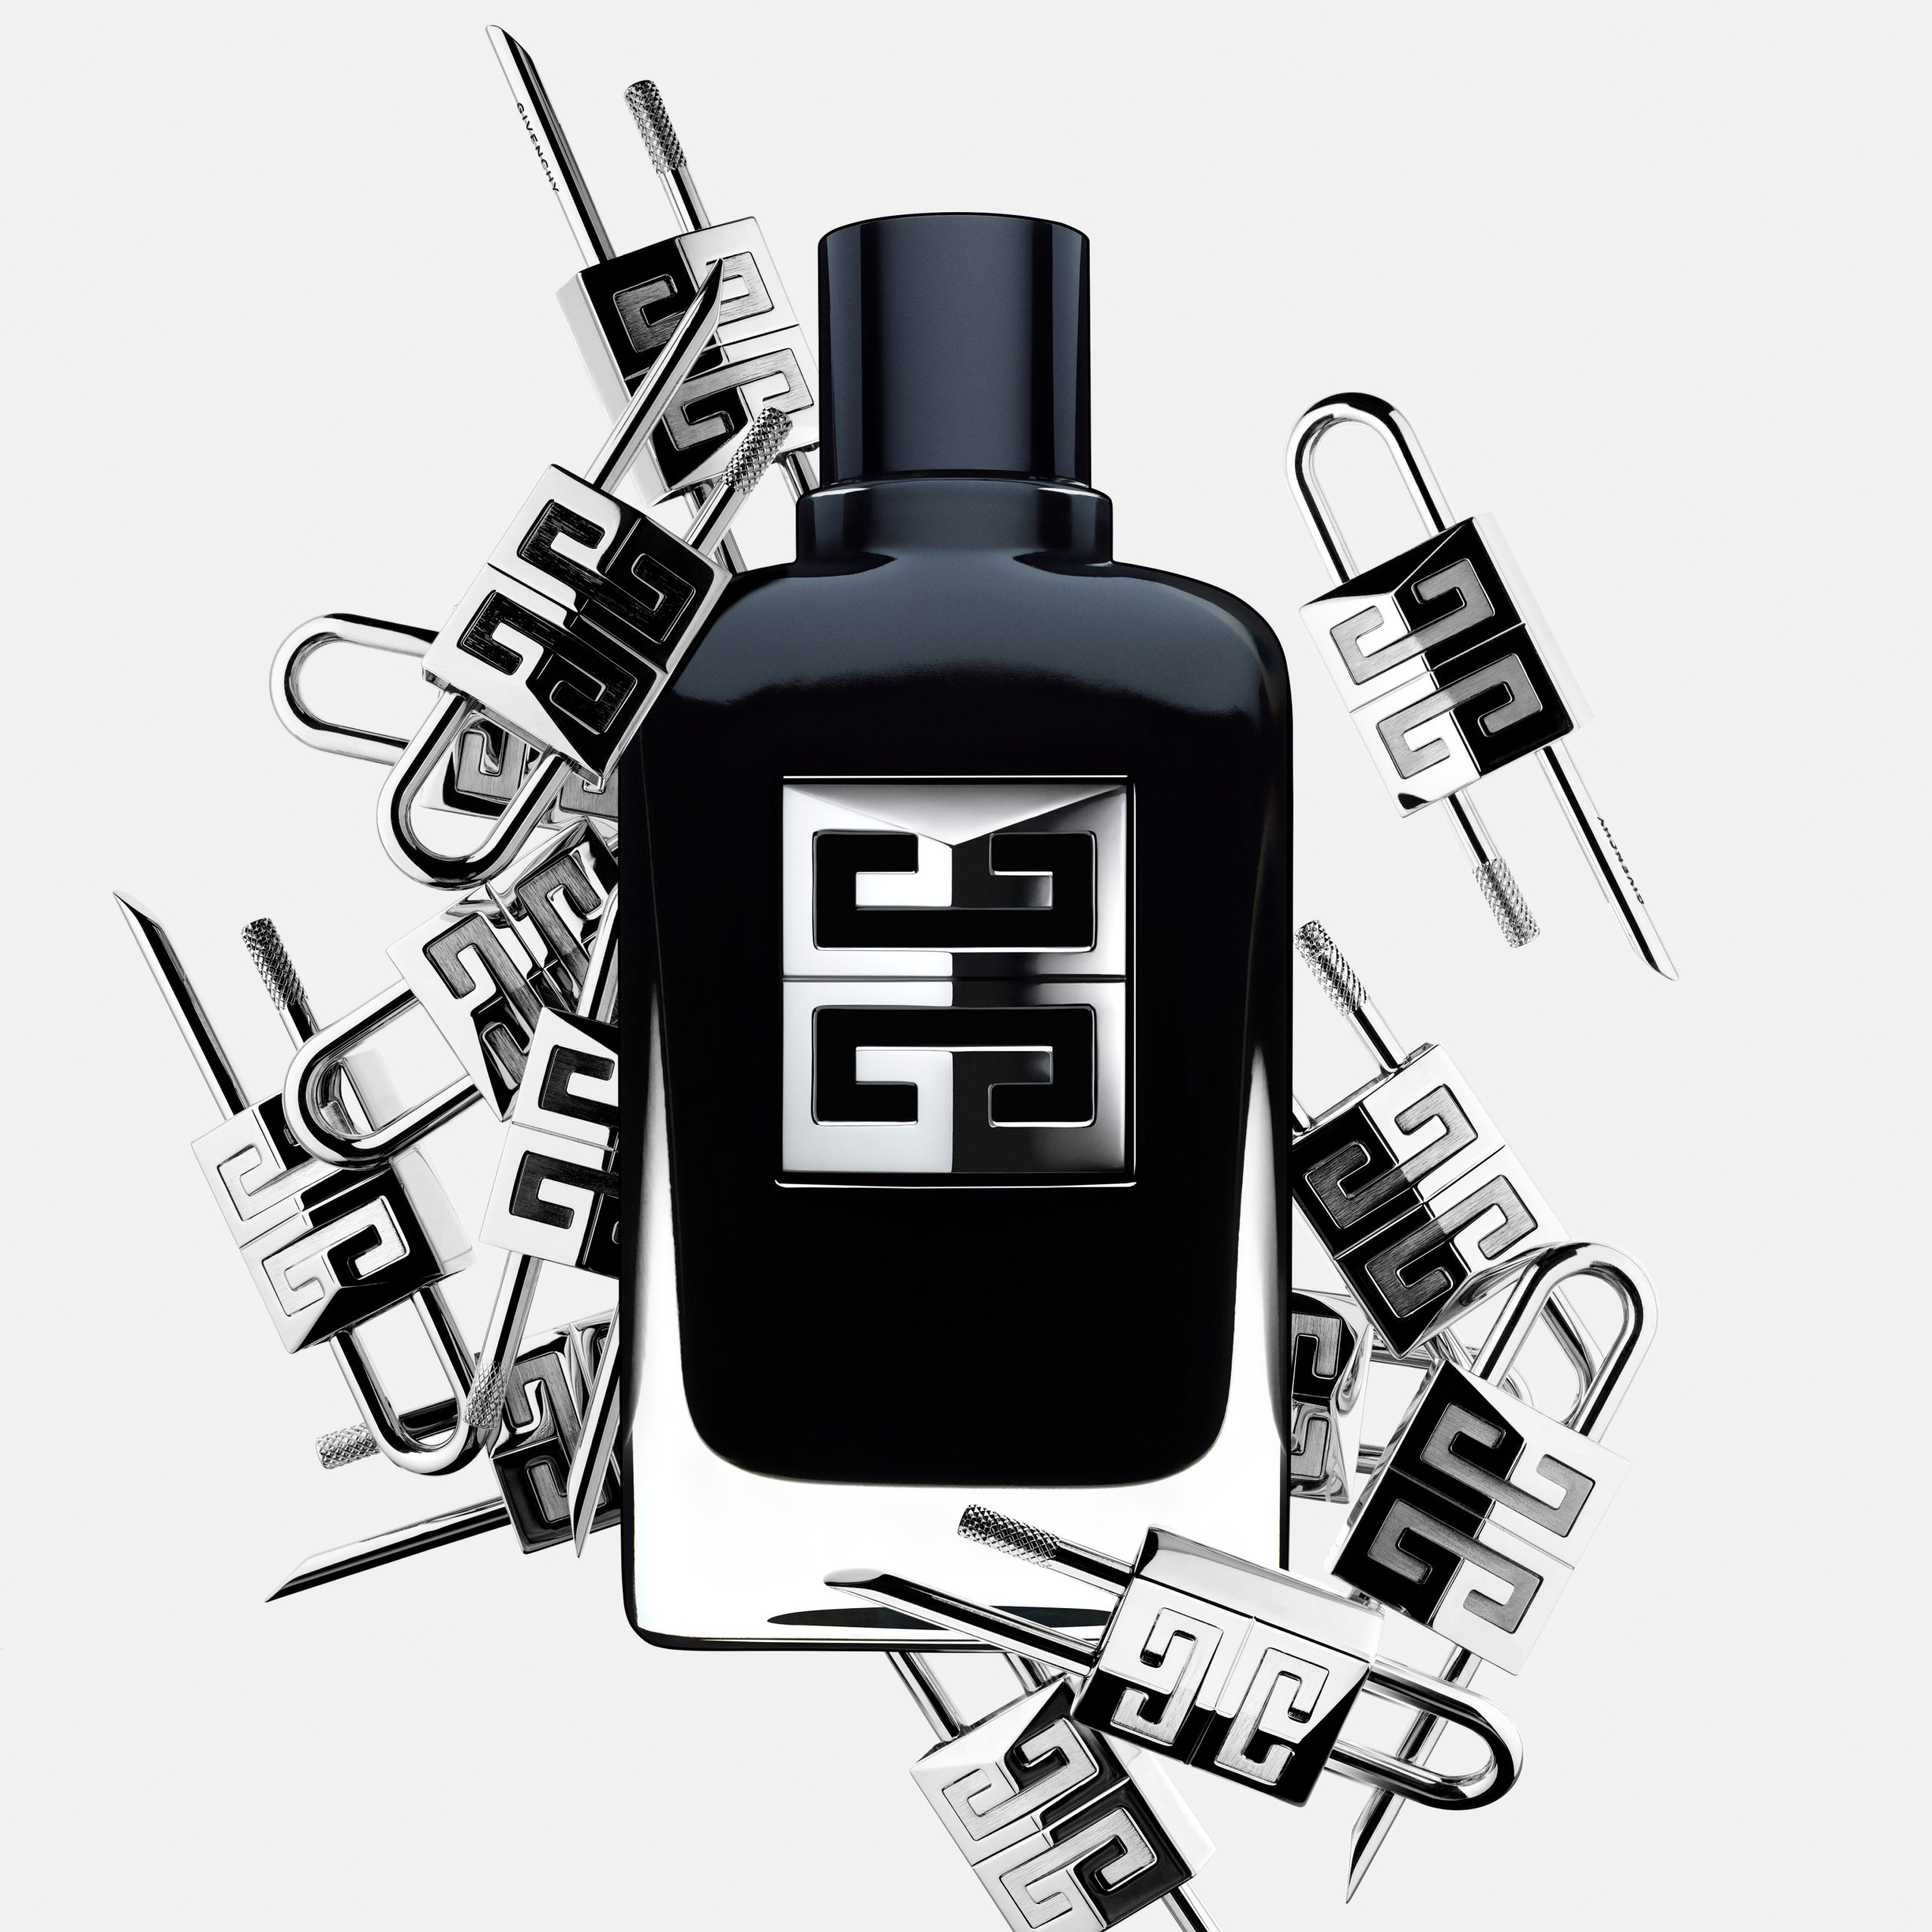 The new Givenchy Gentleman Society EDP gives masculinity a new meaning